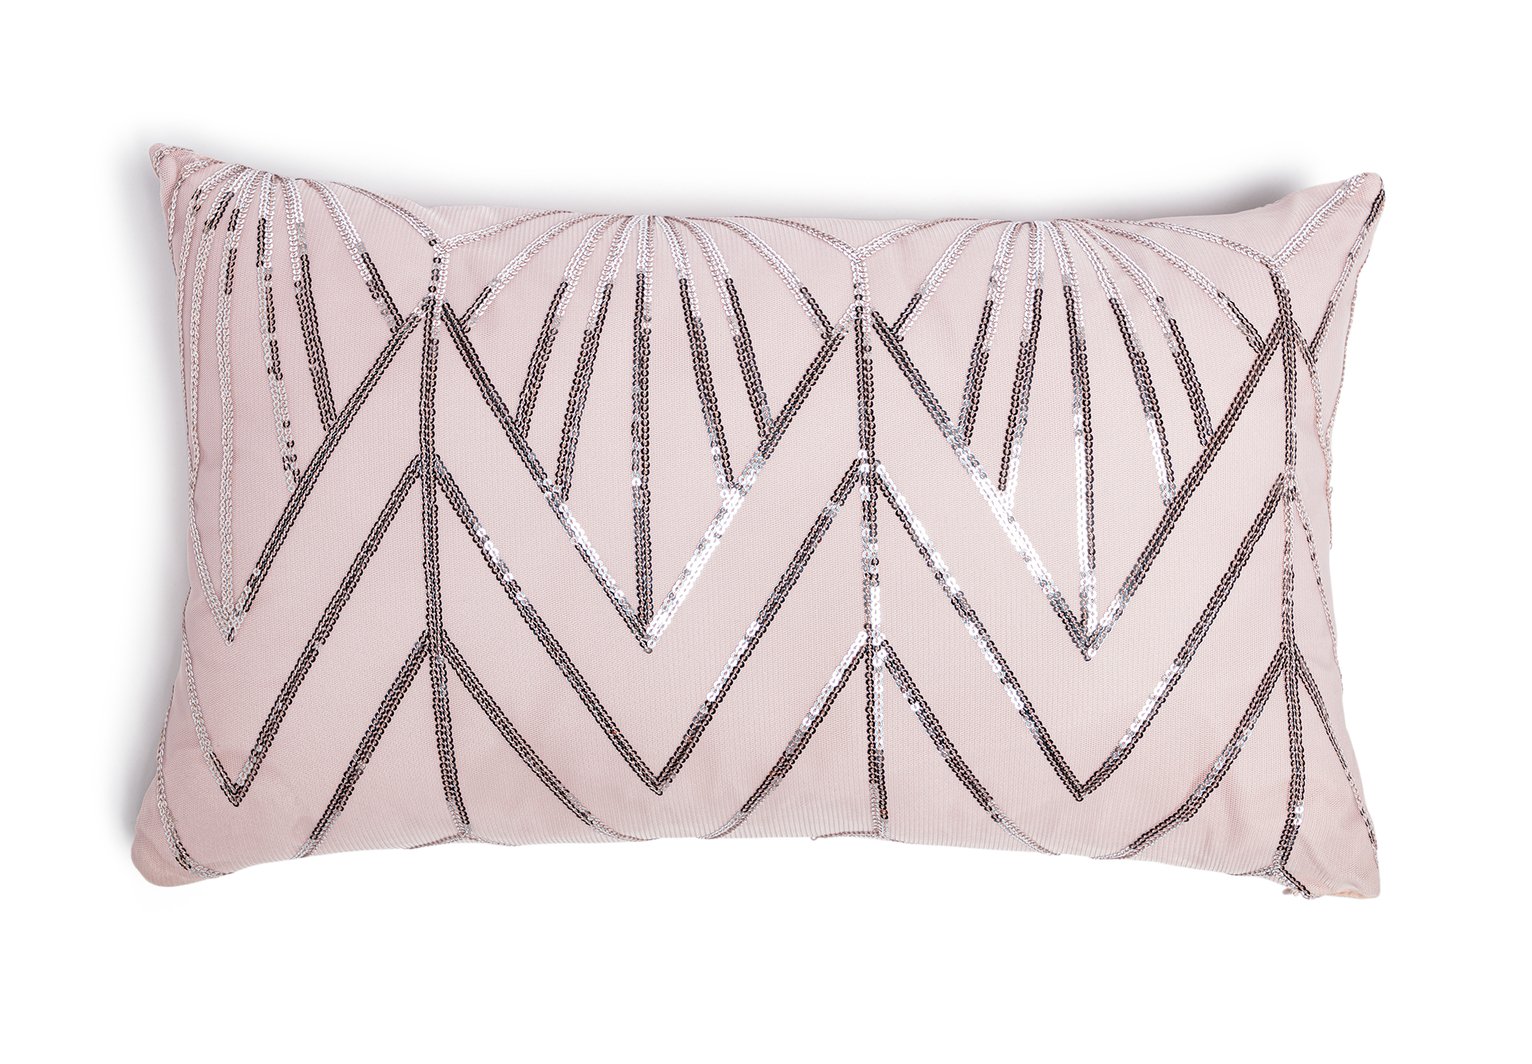 pink sequin cushion